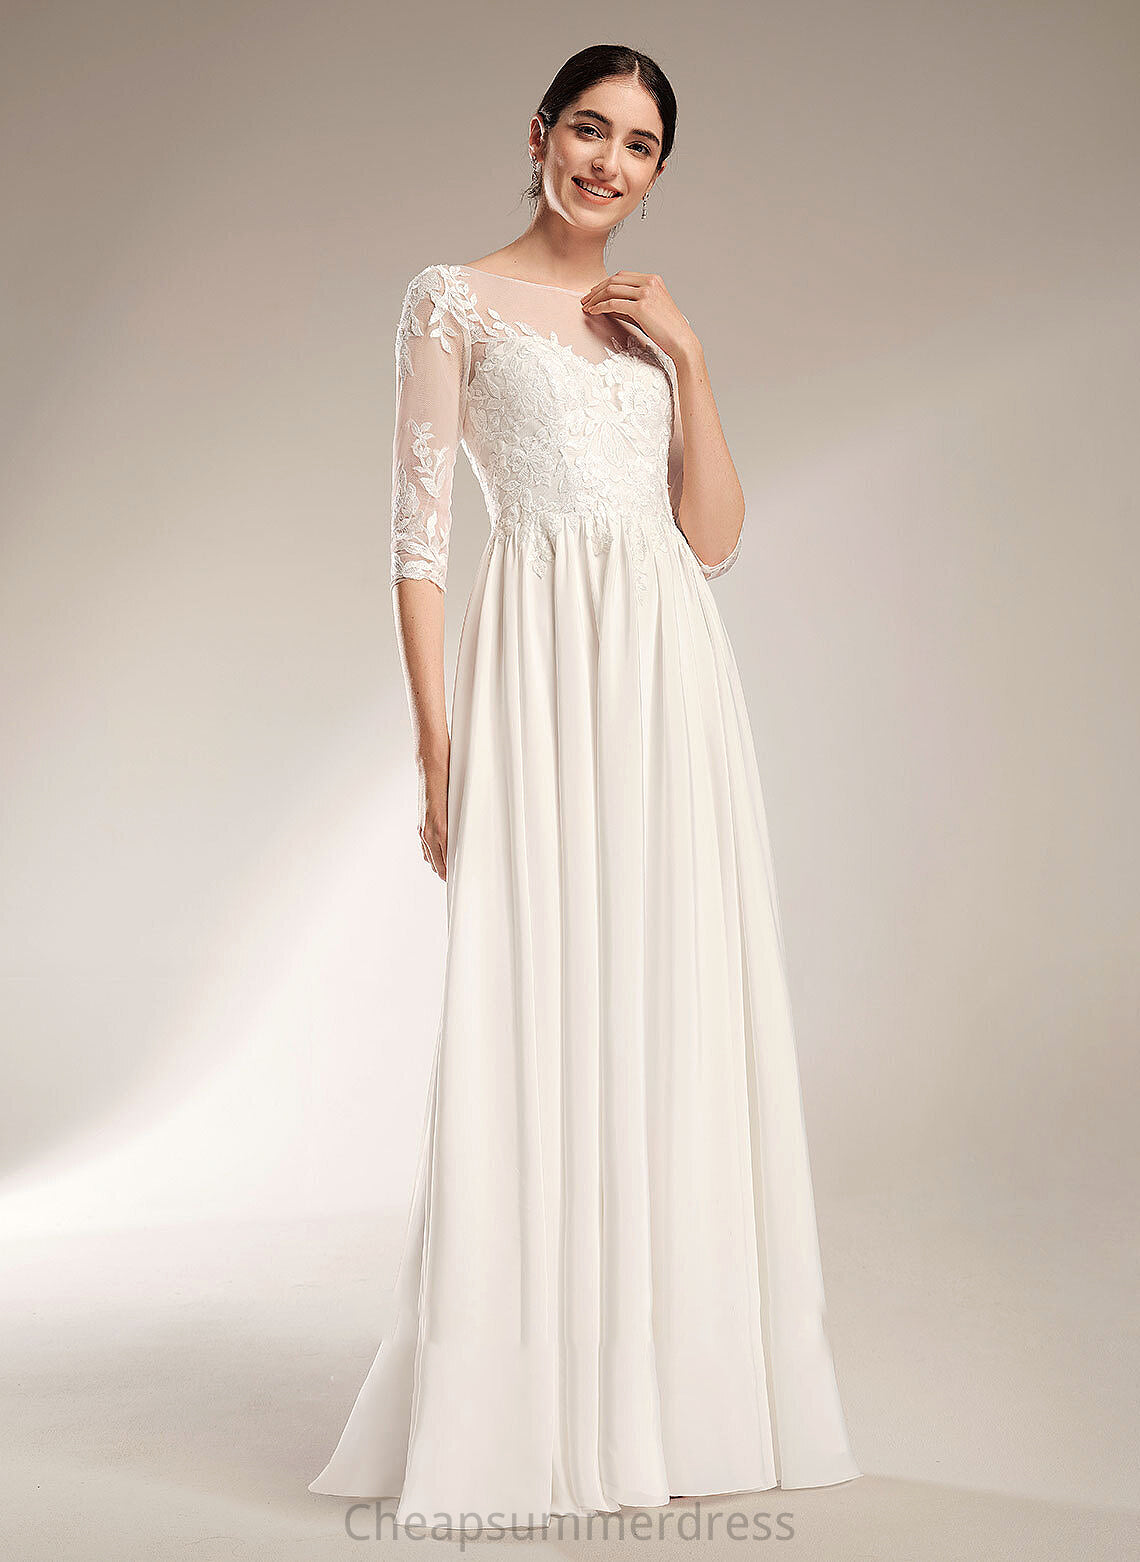 Train Dress Sequins Wedding Laura Sweep Wedding Dresses With Illusion A-Line